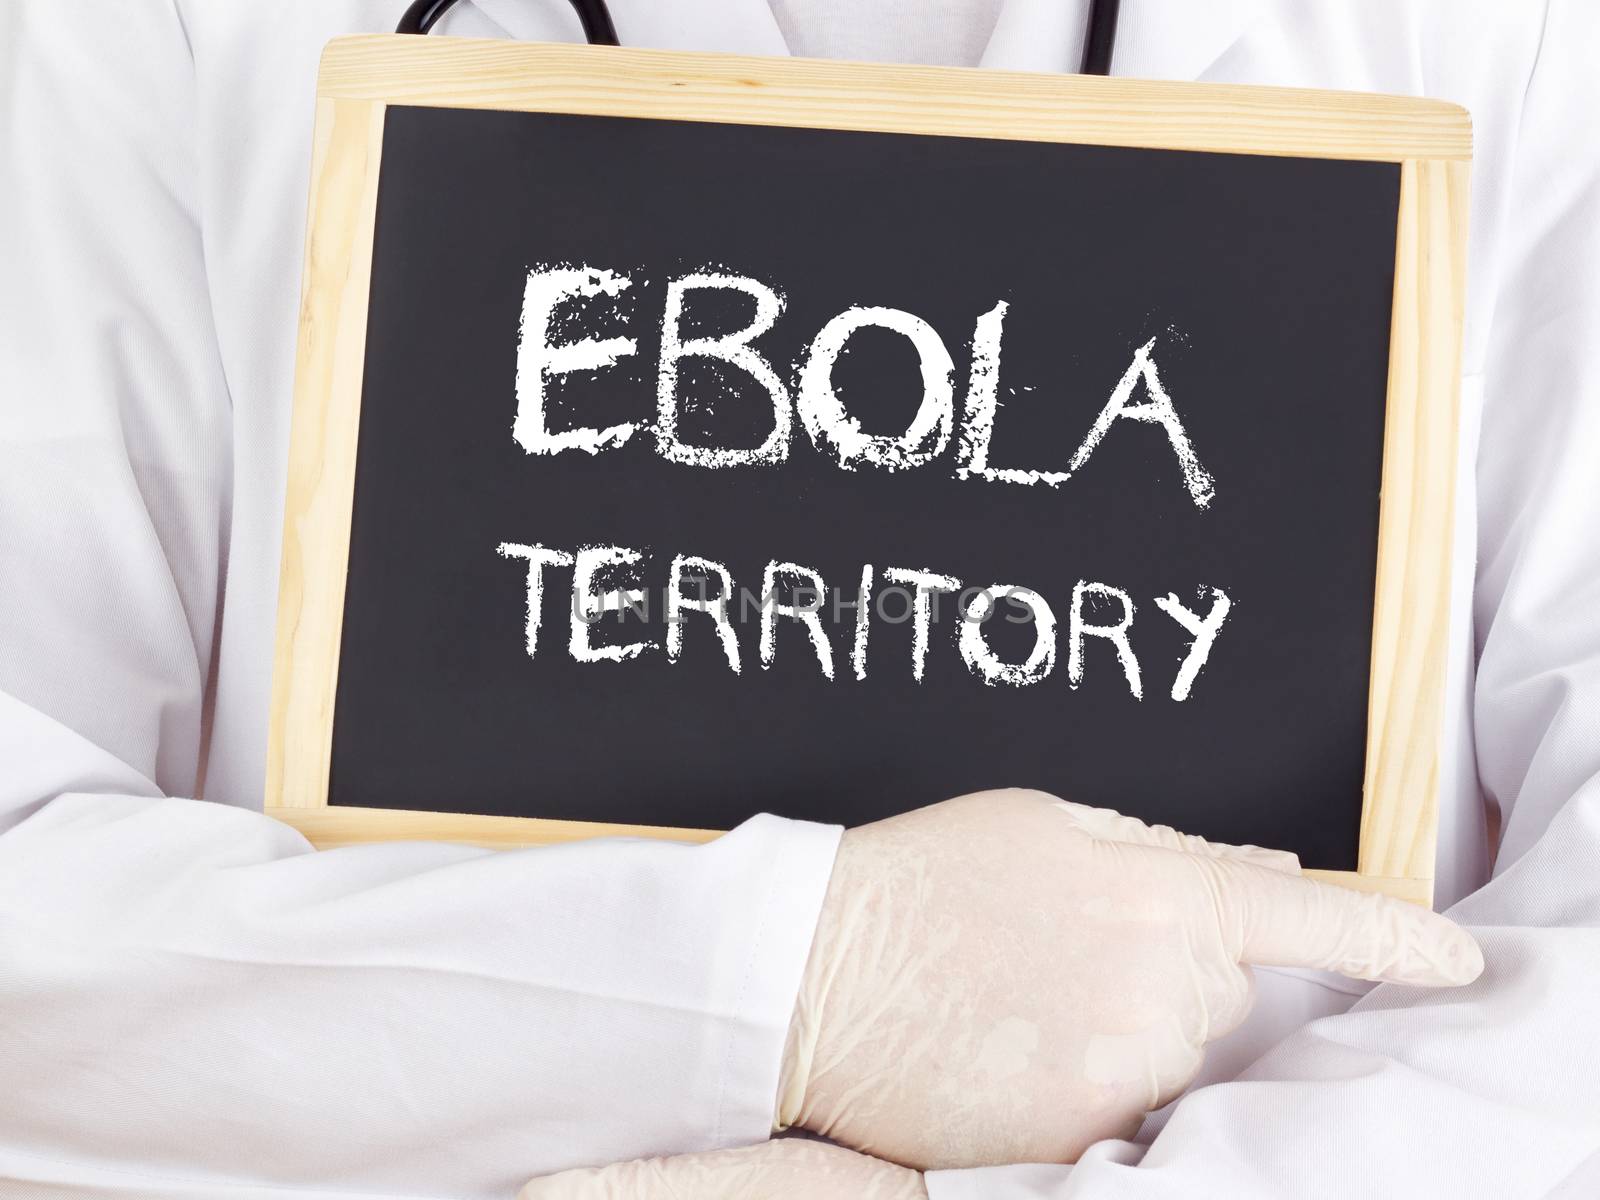 Doctor shows information: Ebola territory by gwolters